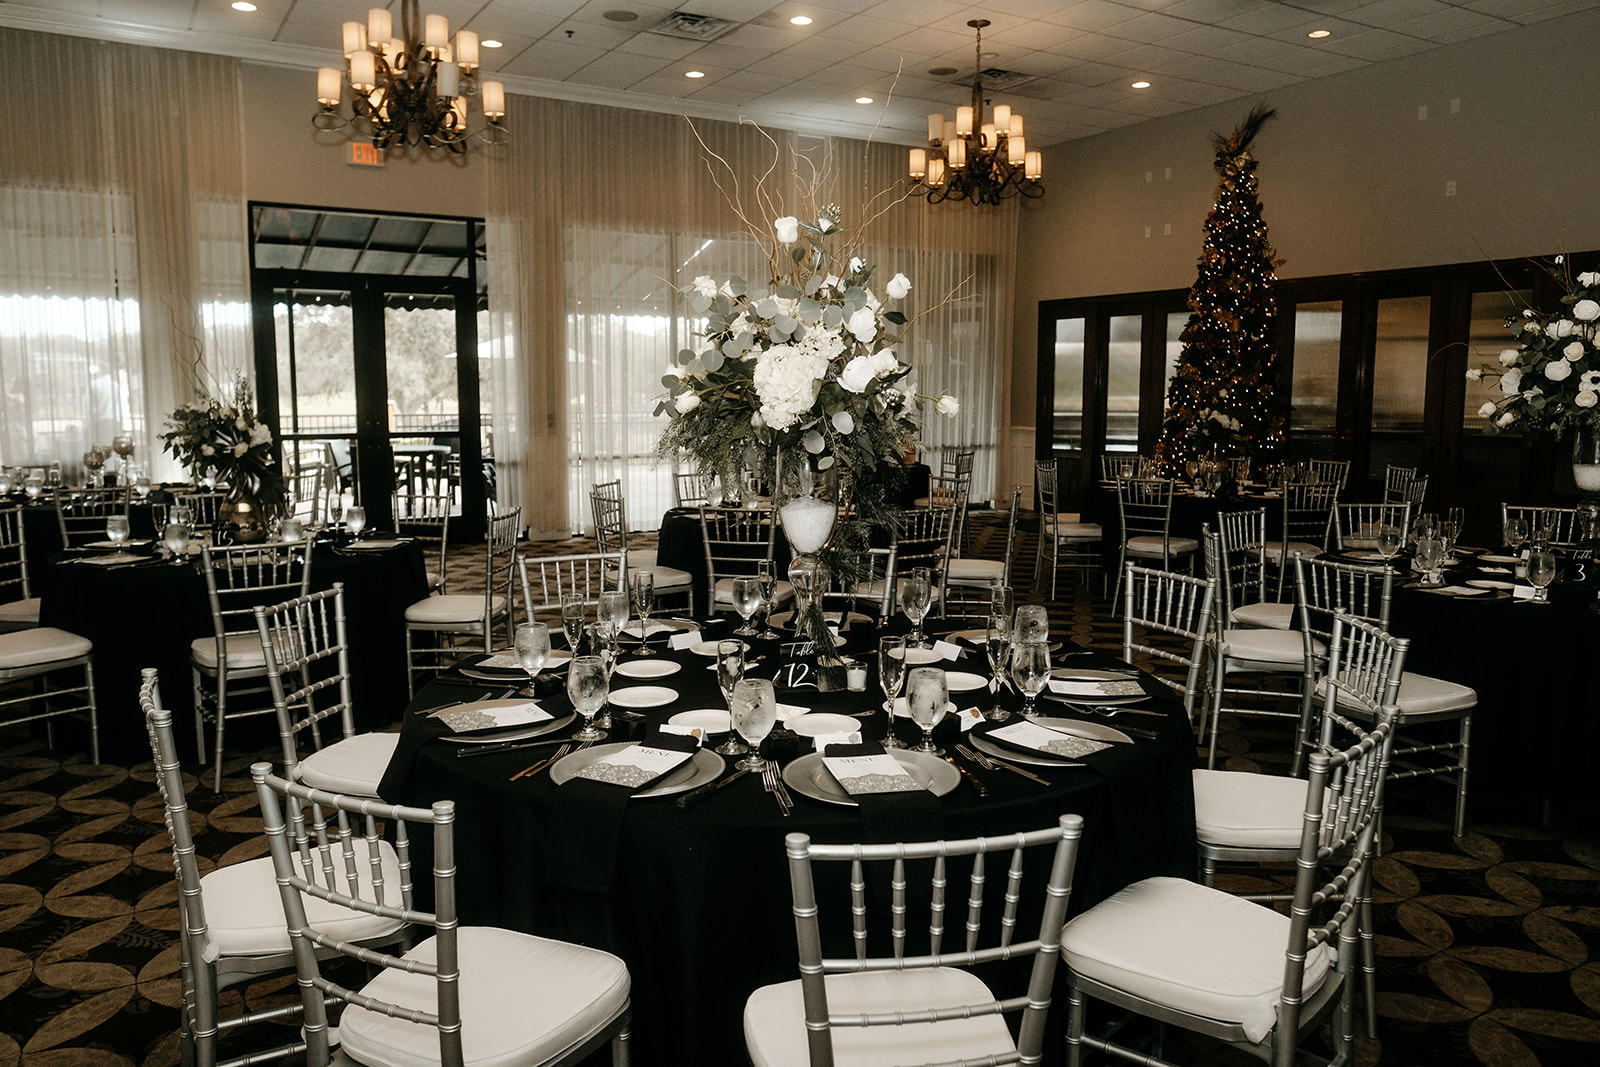 Wedding Reception with Silver and Green Details | Tampa Wedding Planner Eventfull Planner